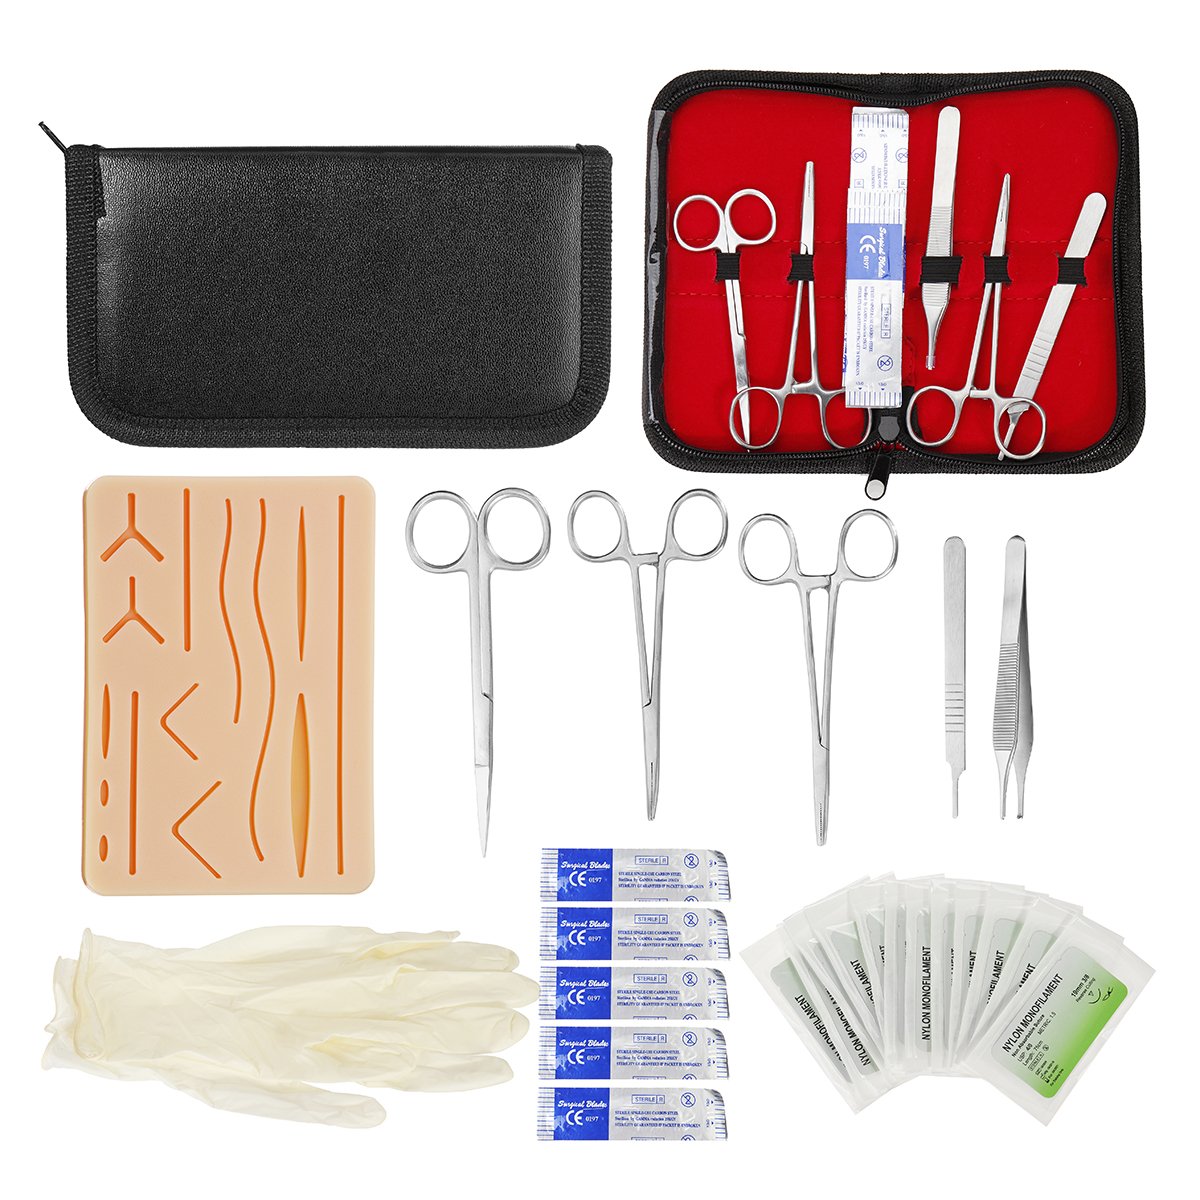 25 In 1 Medical Skin Suture Surgical Training Kit Silicone Pad Needle Scissors 2